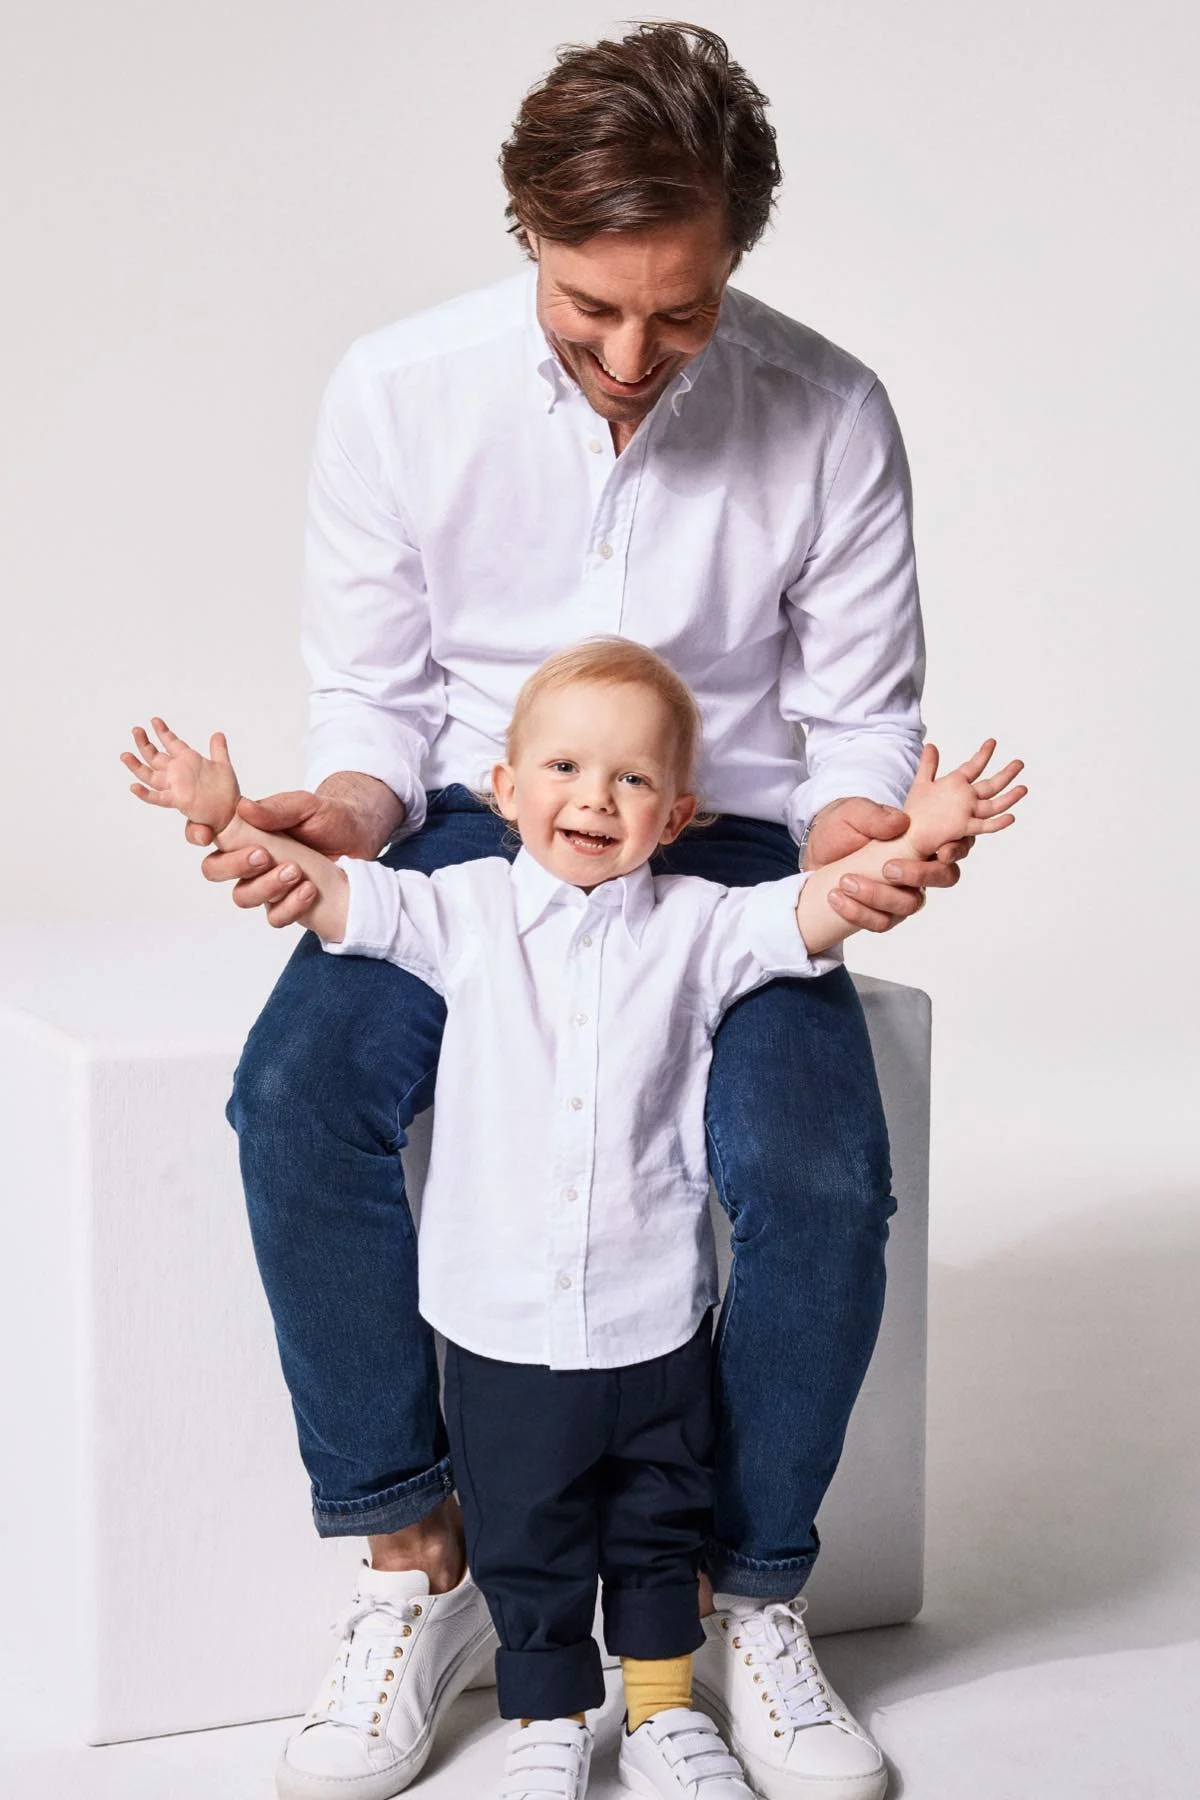 model with child wearing white shirts